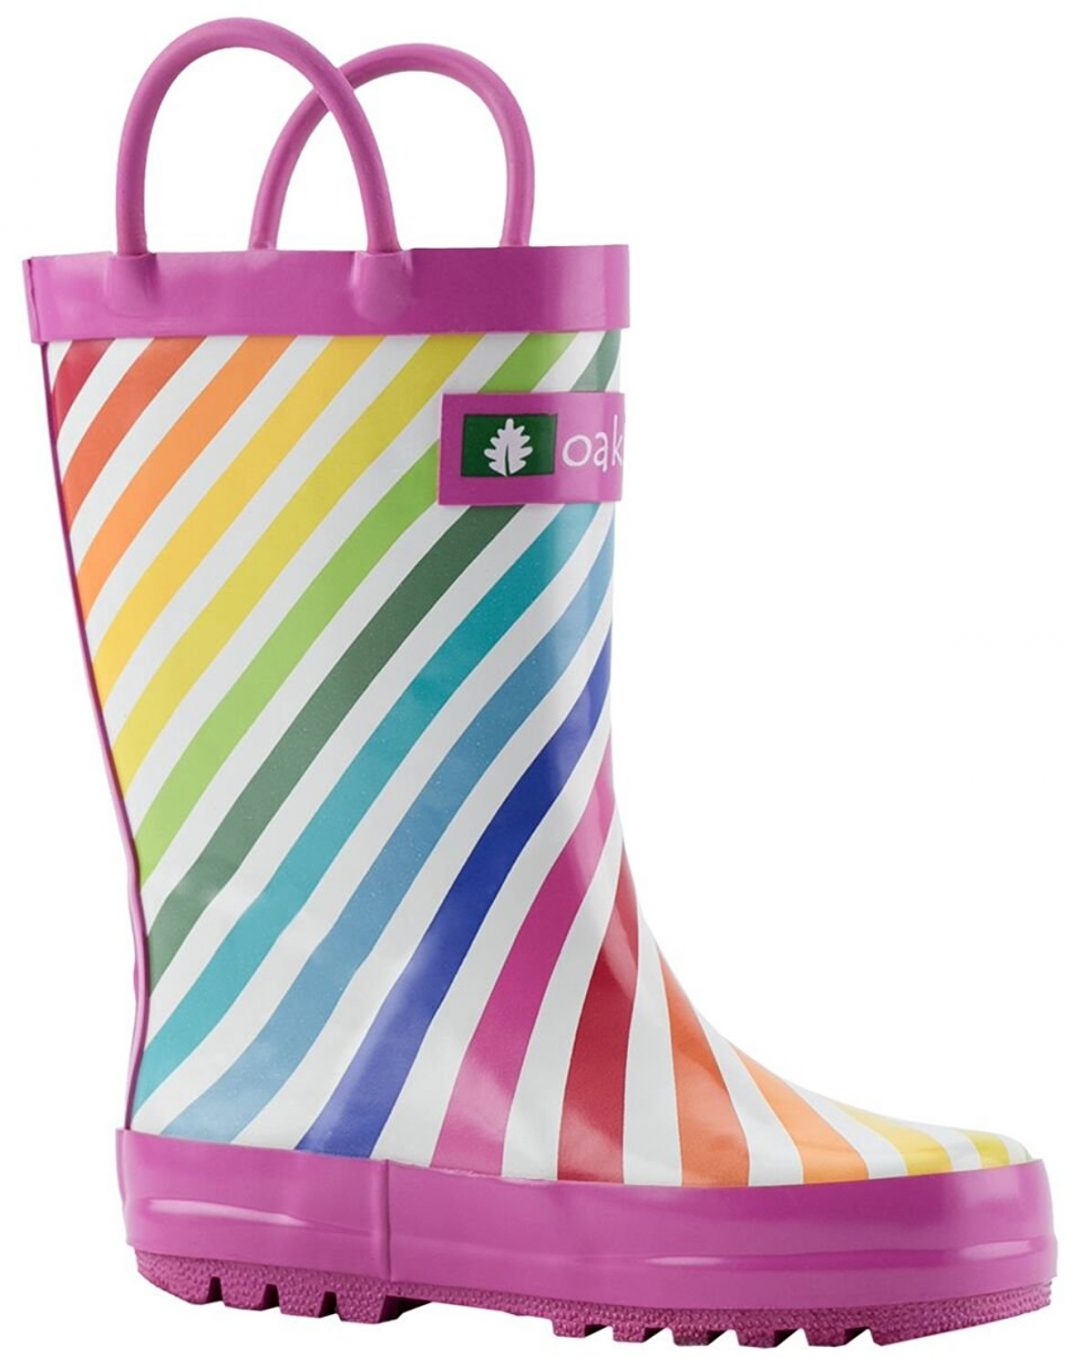 12 crazy patterned rain boots for toddlers, all under $30. Including ...